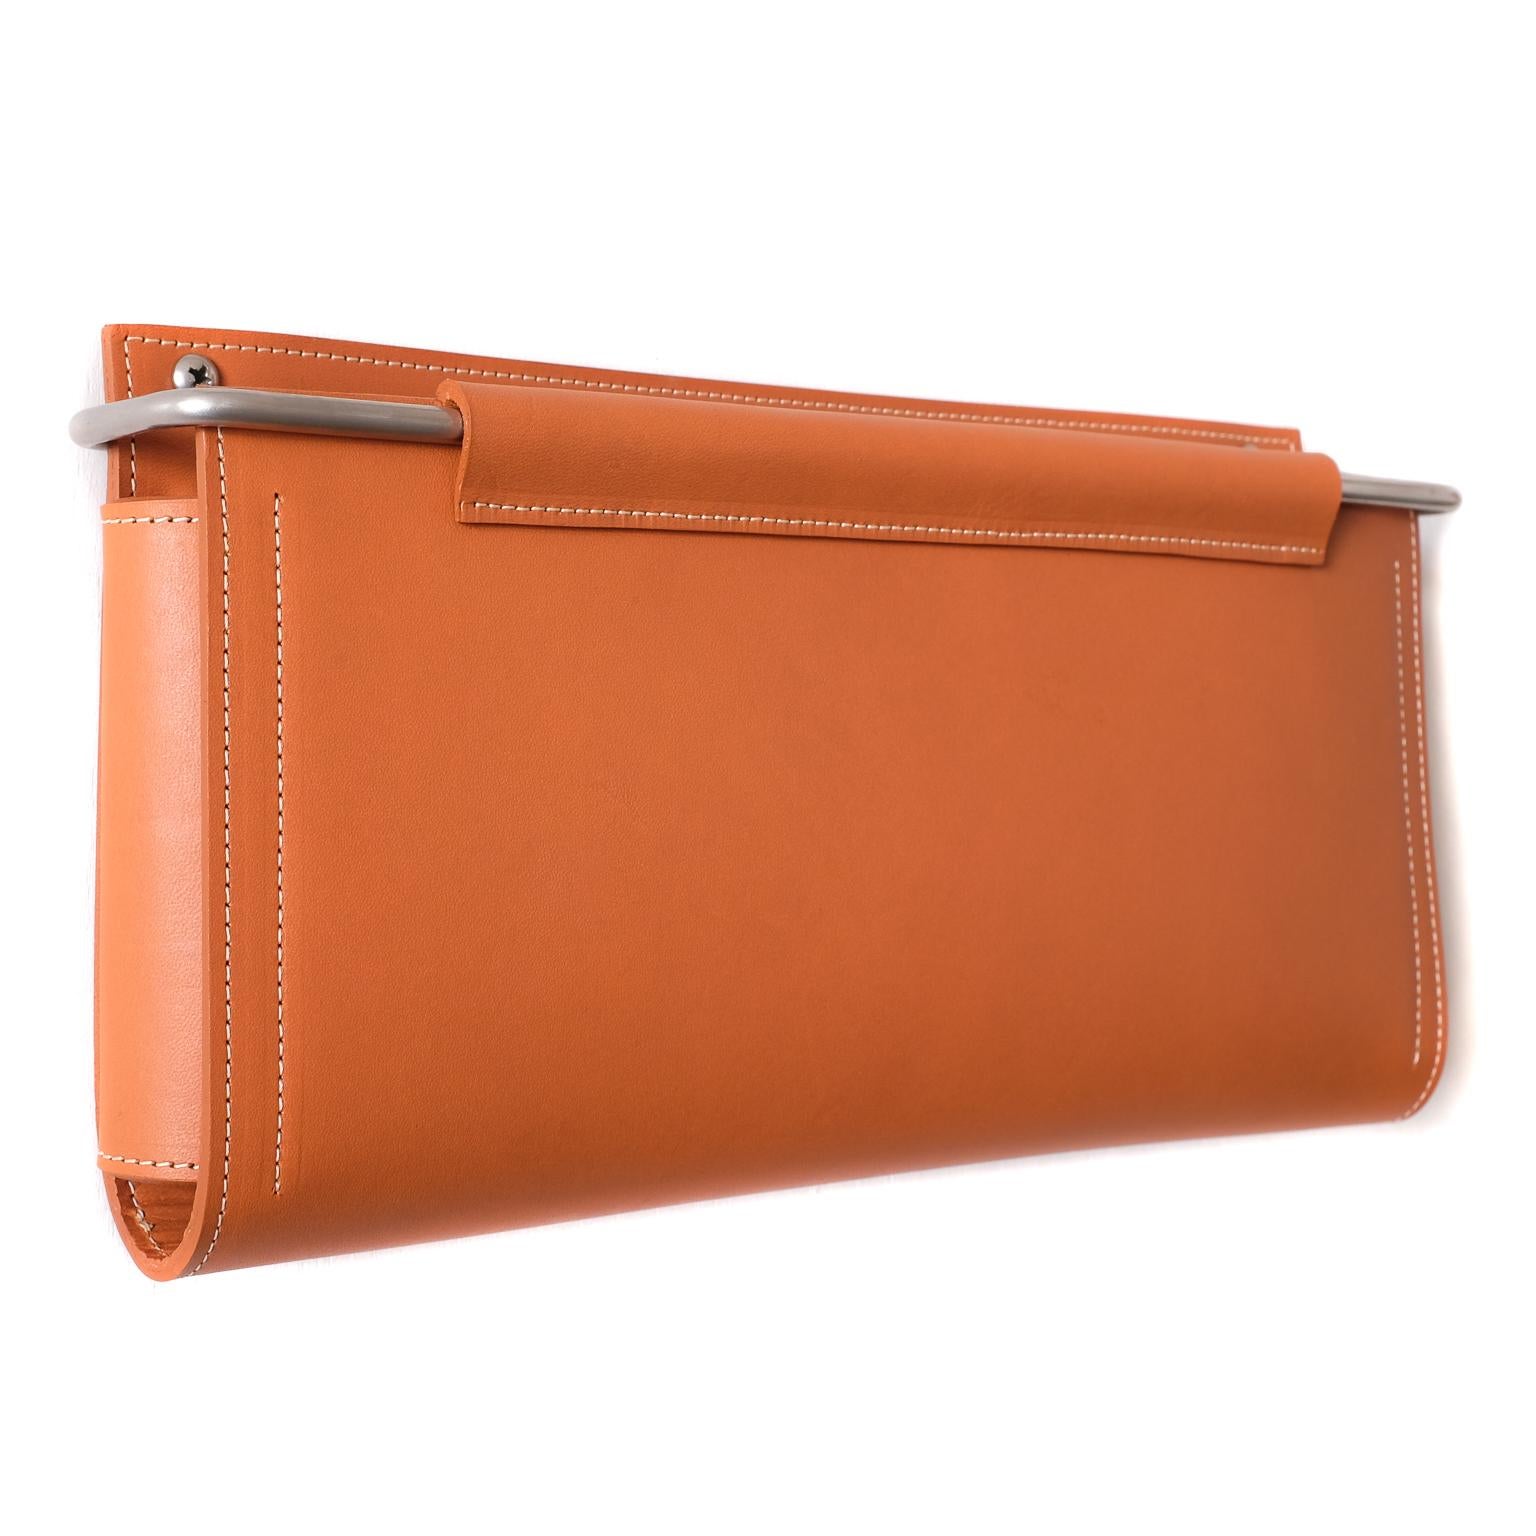 Wall Pocket 12"Lx1.5"x7"H in Saddle Leather and Stainless Steel by Moses Nadel For Sale